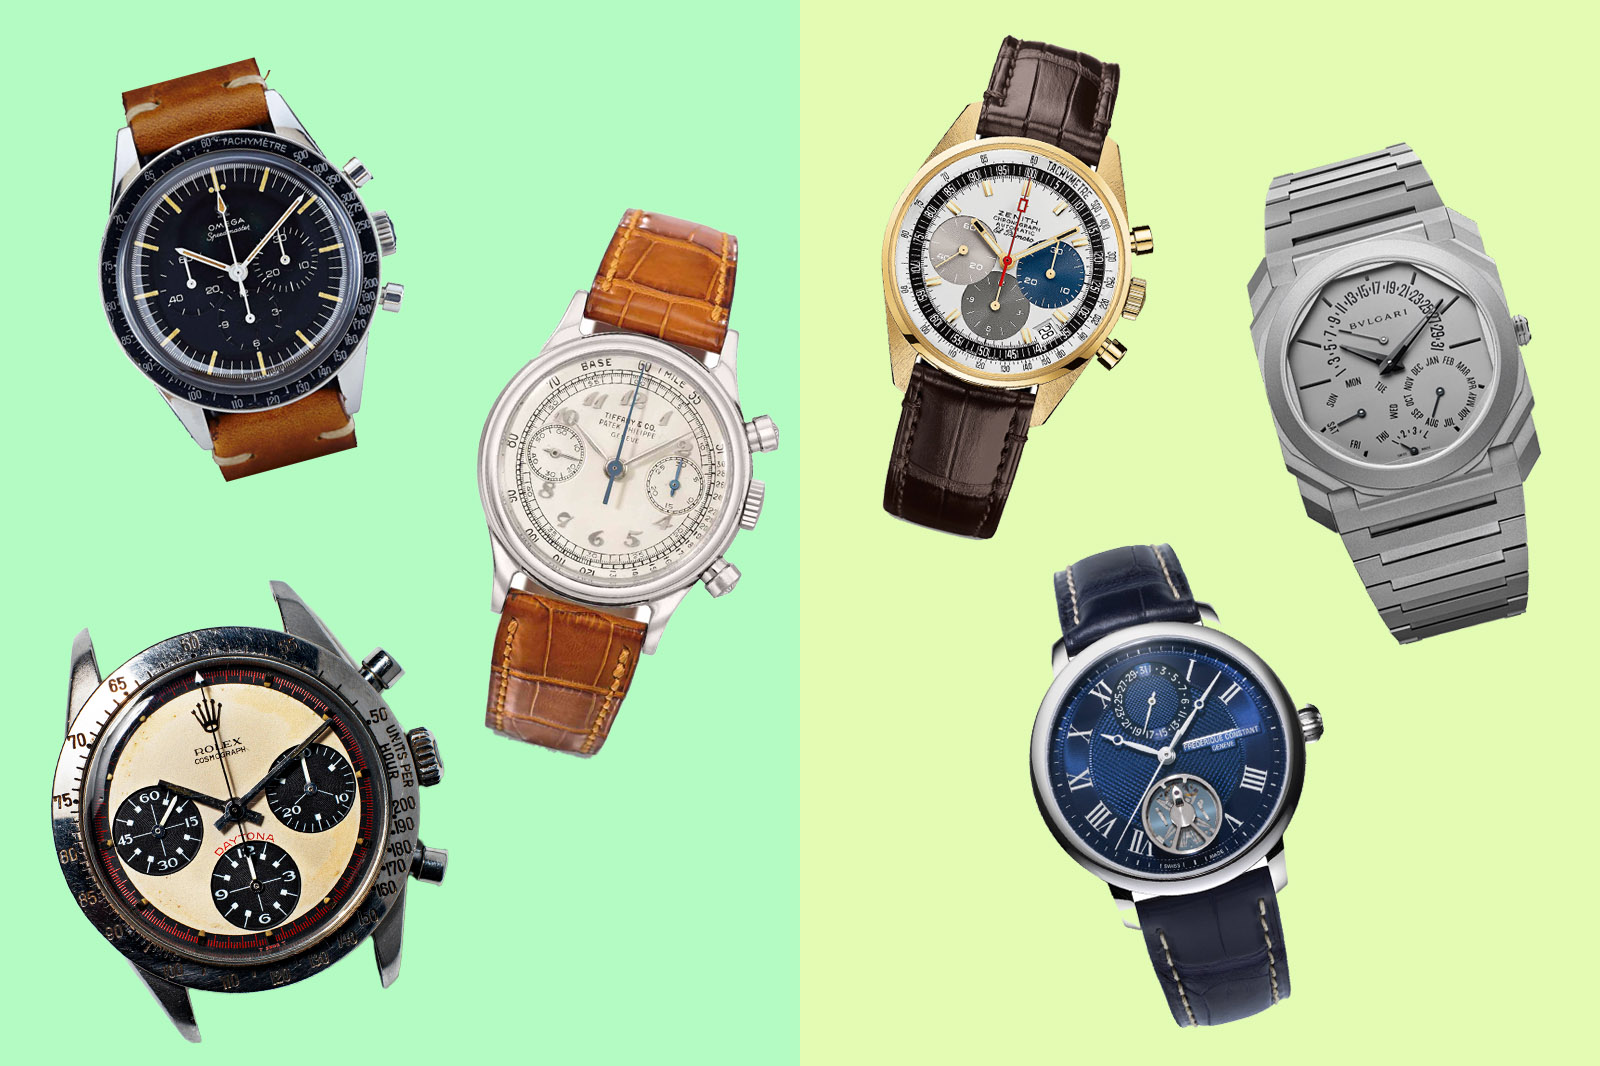 The 19 Best Cutting-Edge Watches to Give the Futurist in Your Life